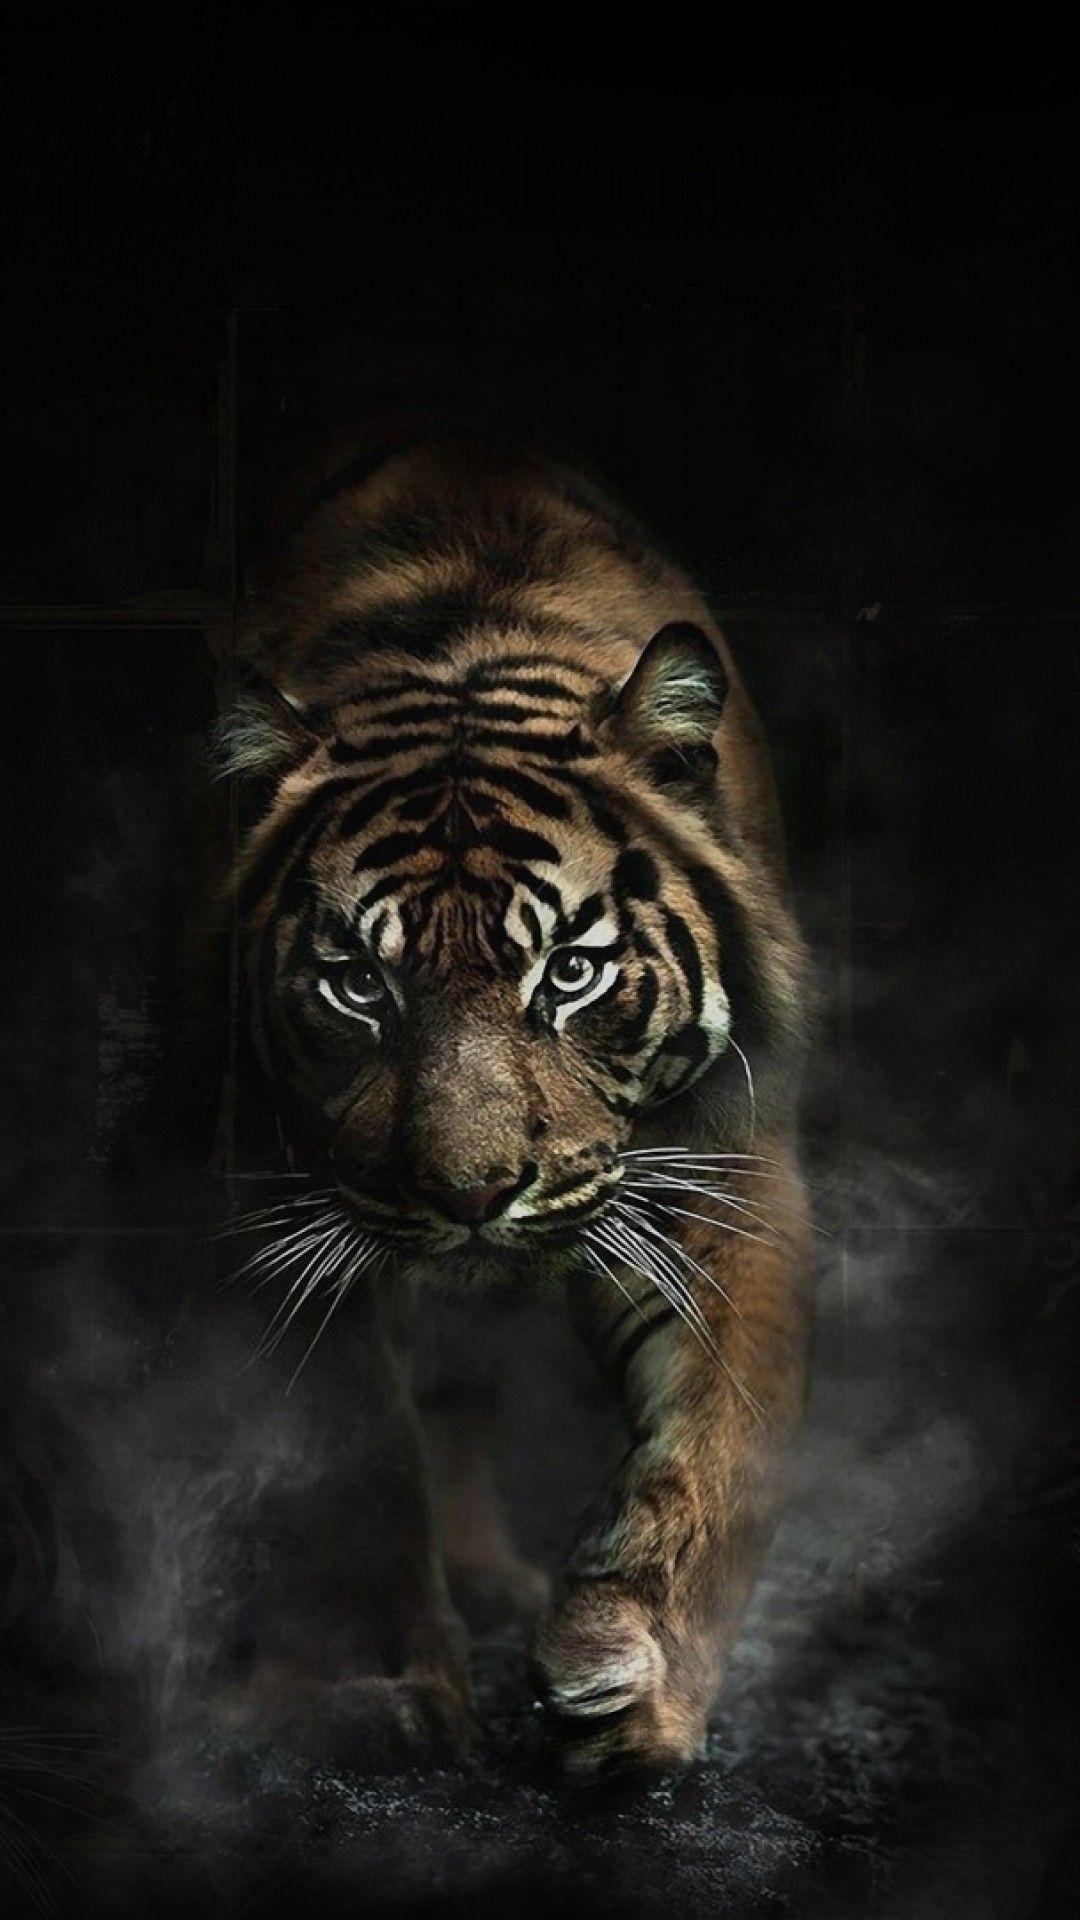 Aesthetic Tiger Wallpapers - Top Free Aesthetic Tiger Backgrounds